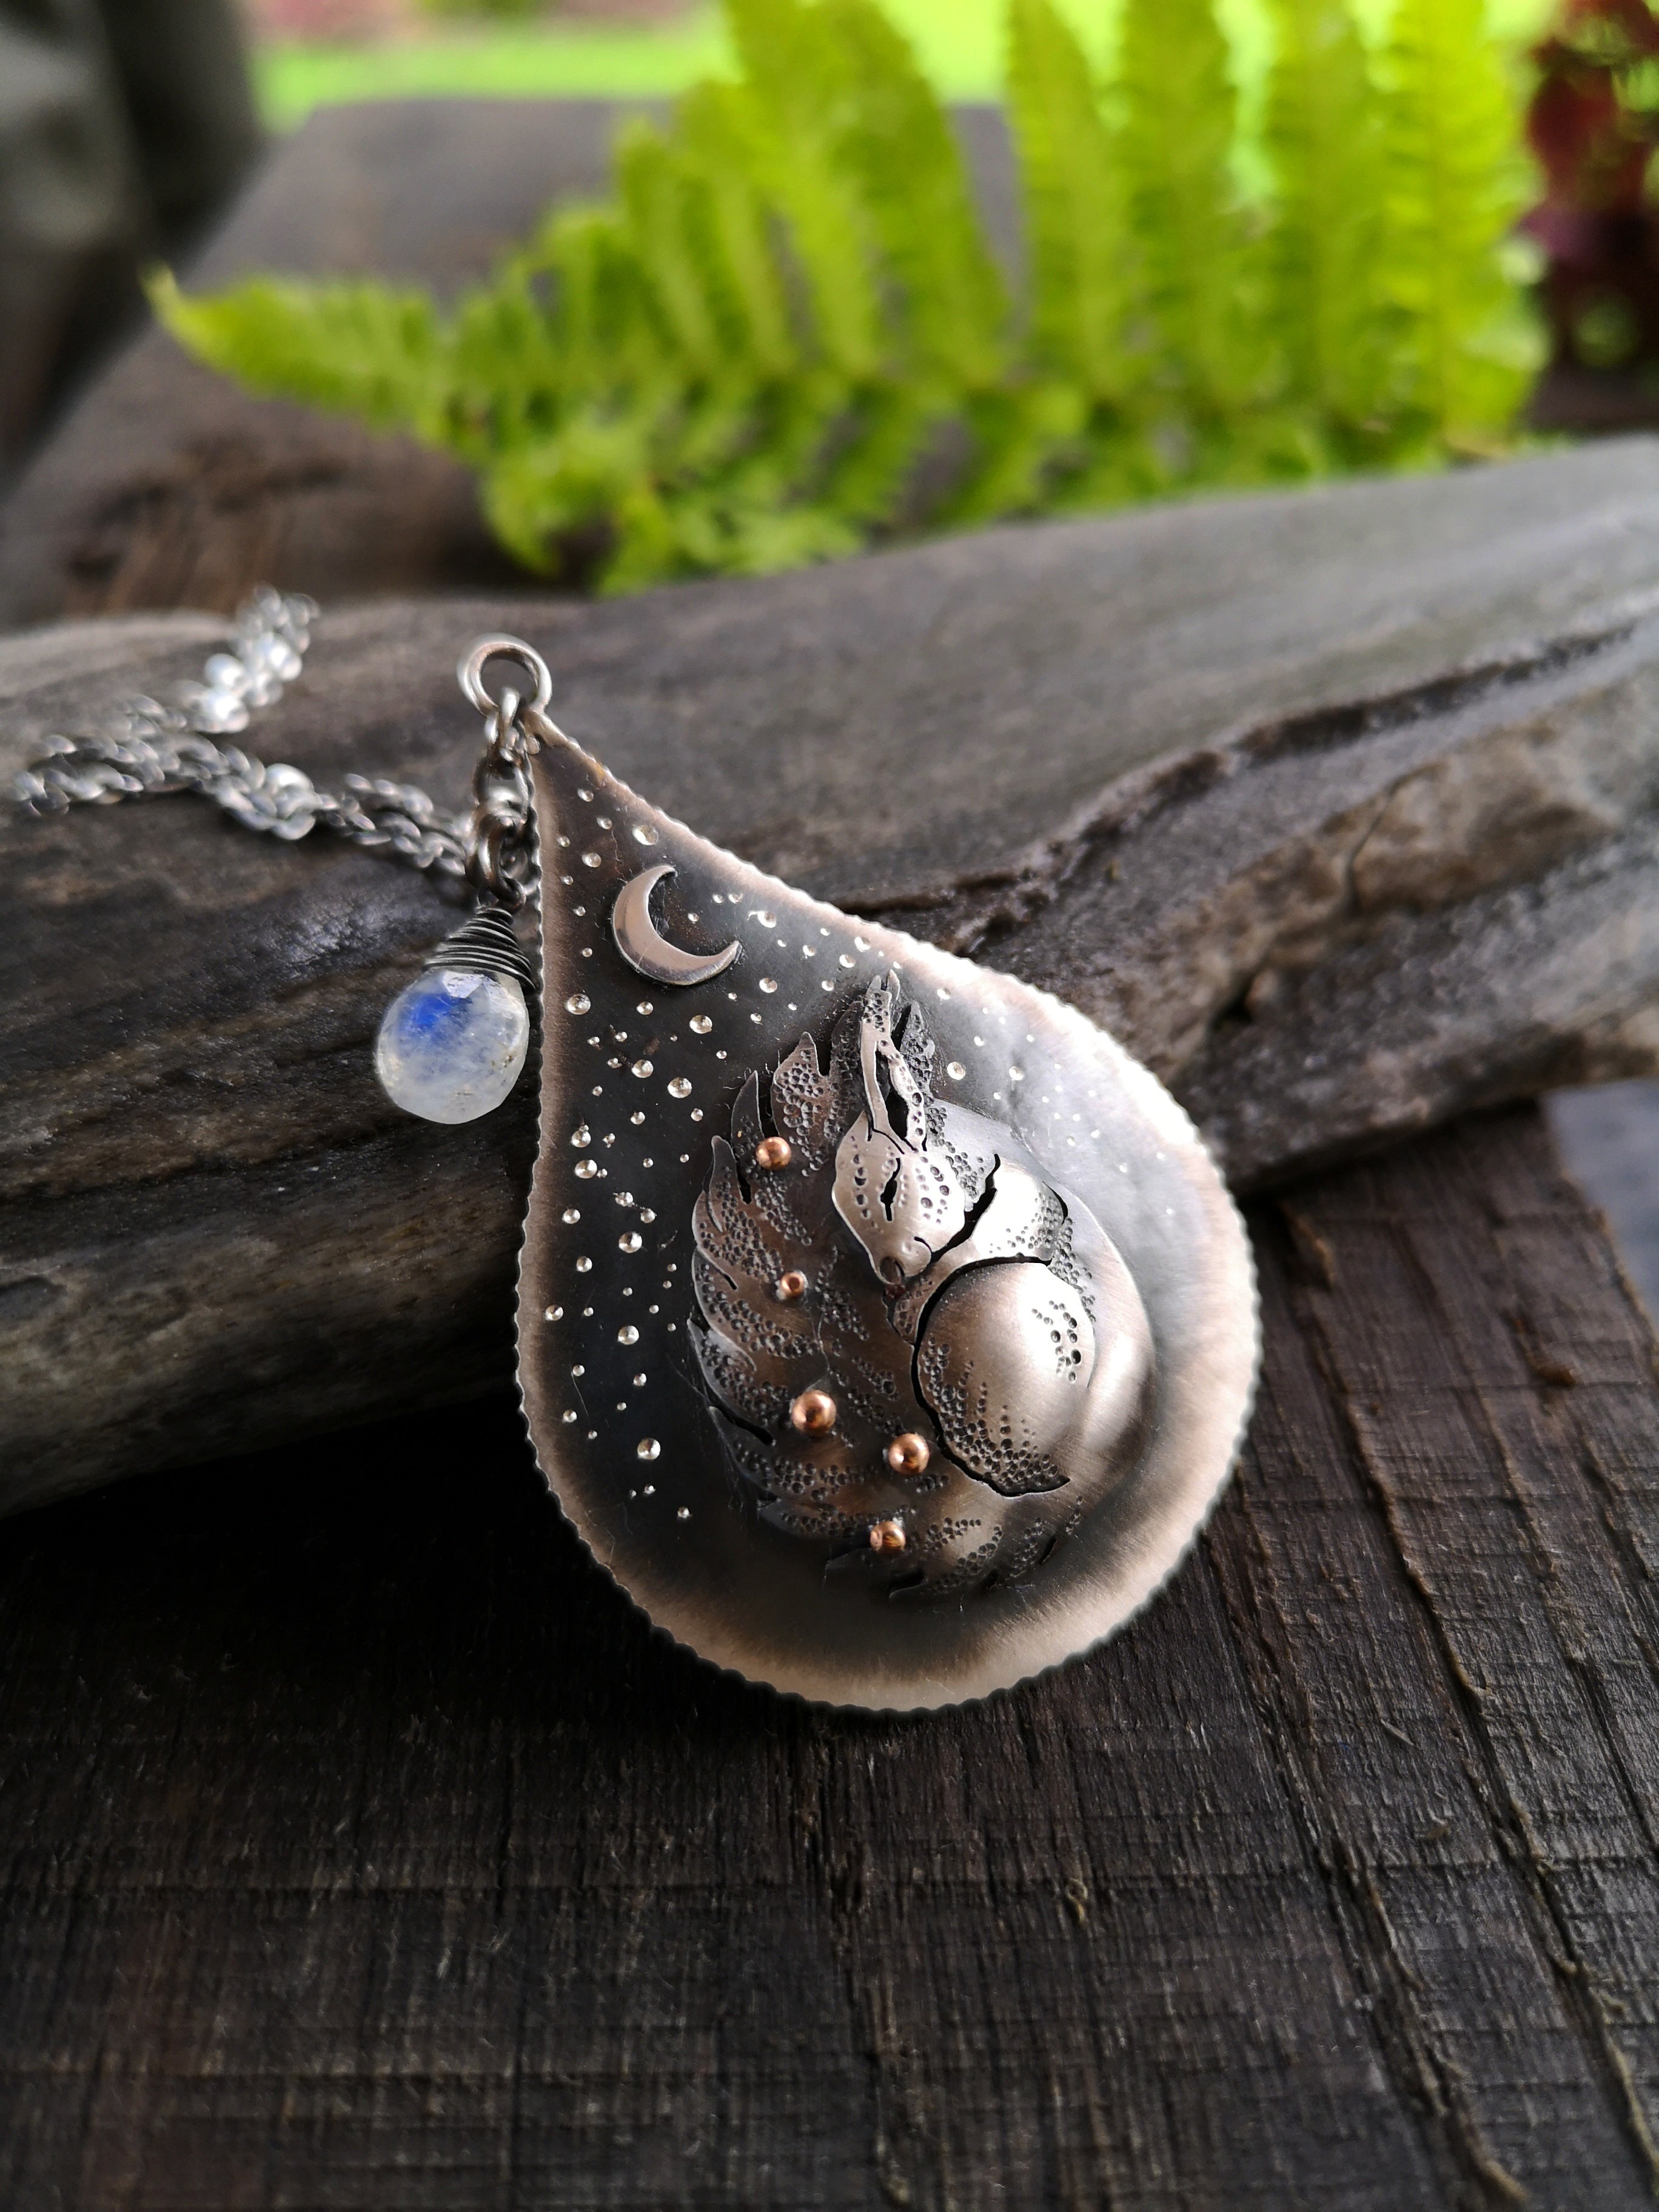 The Sleeping Squirrel Necklace I